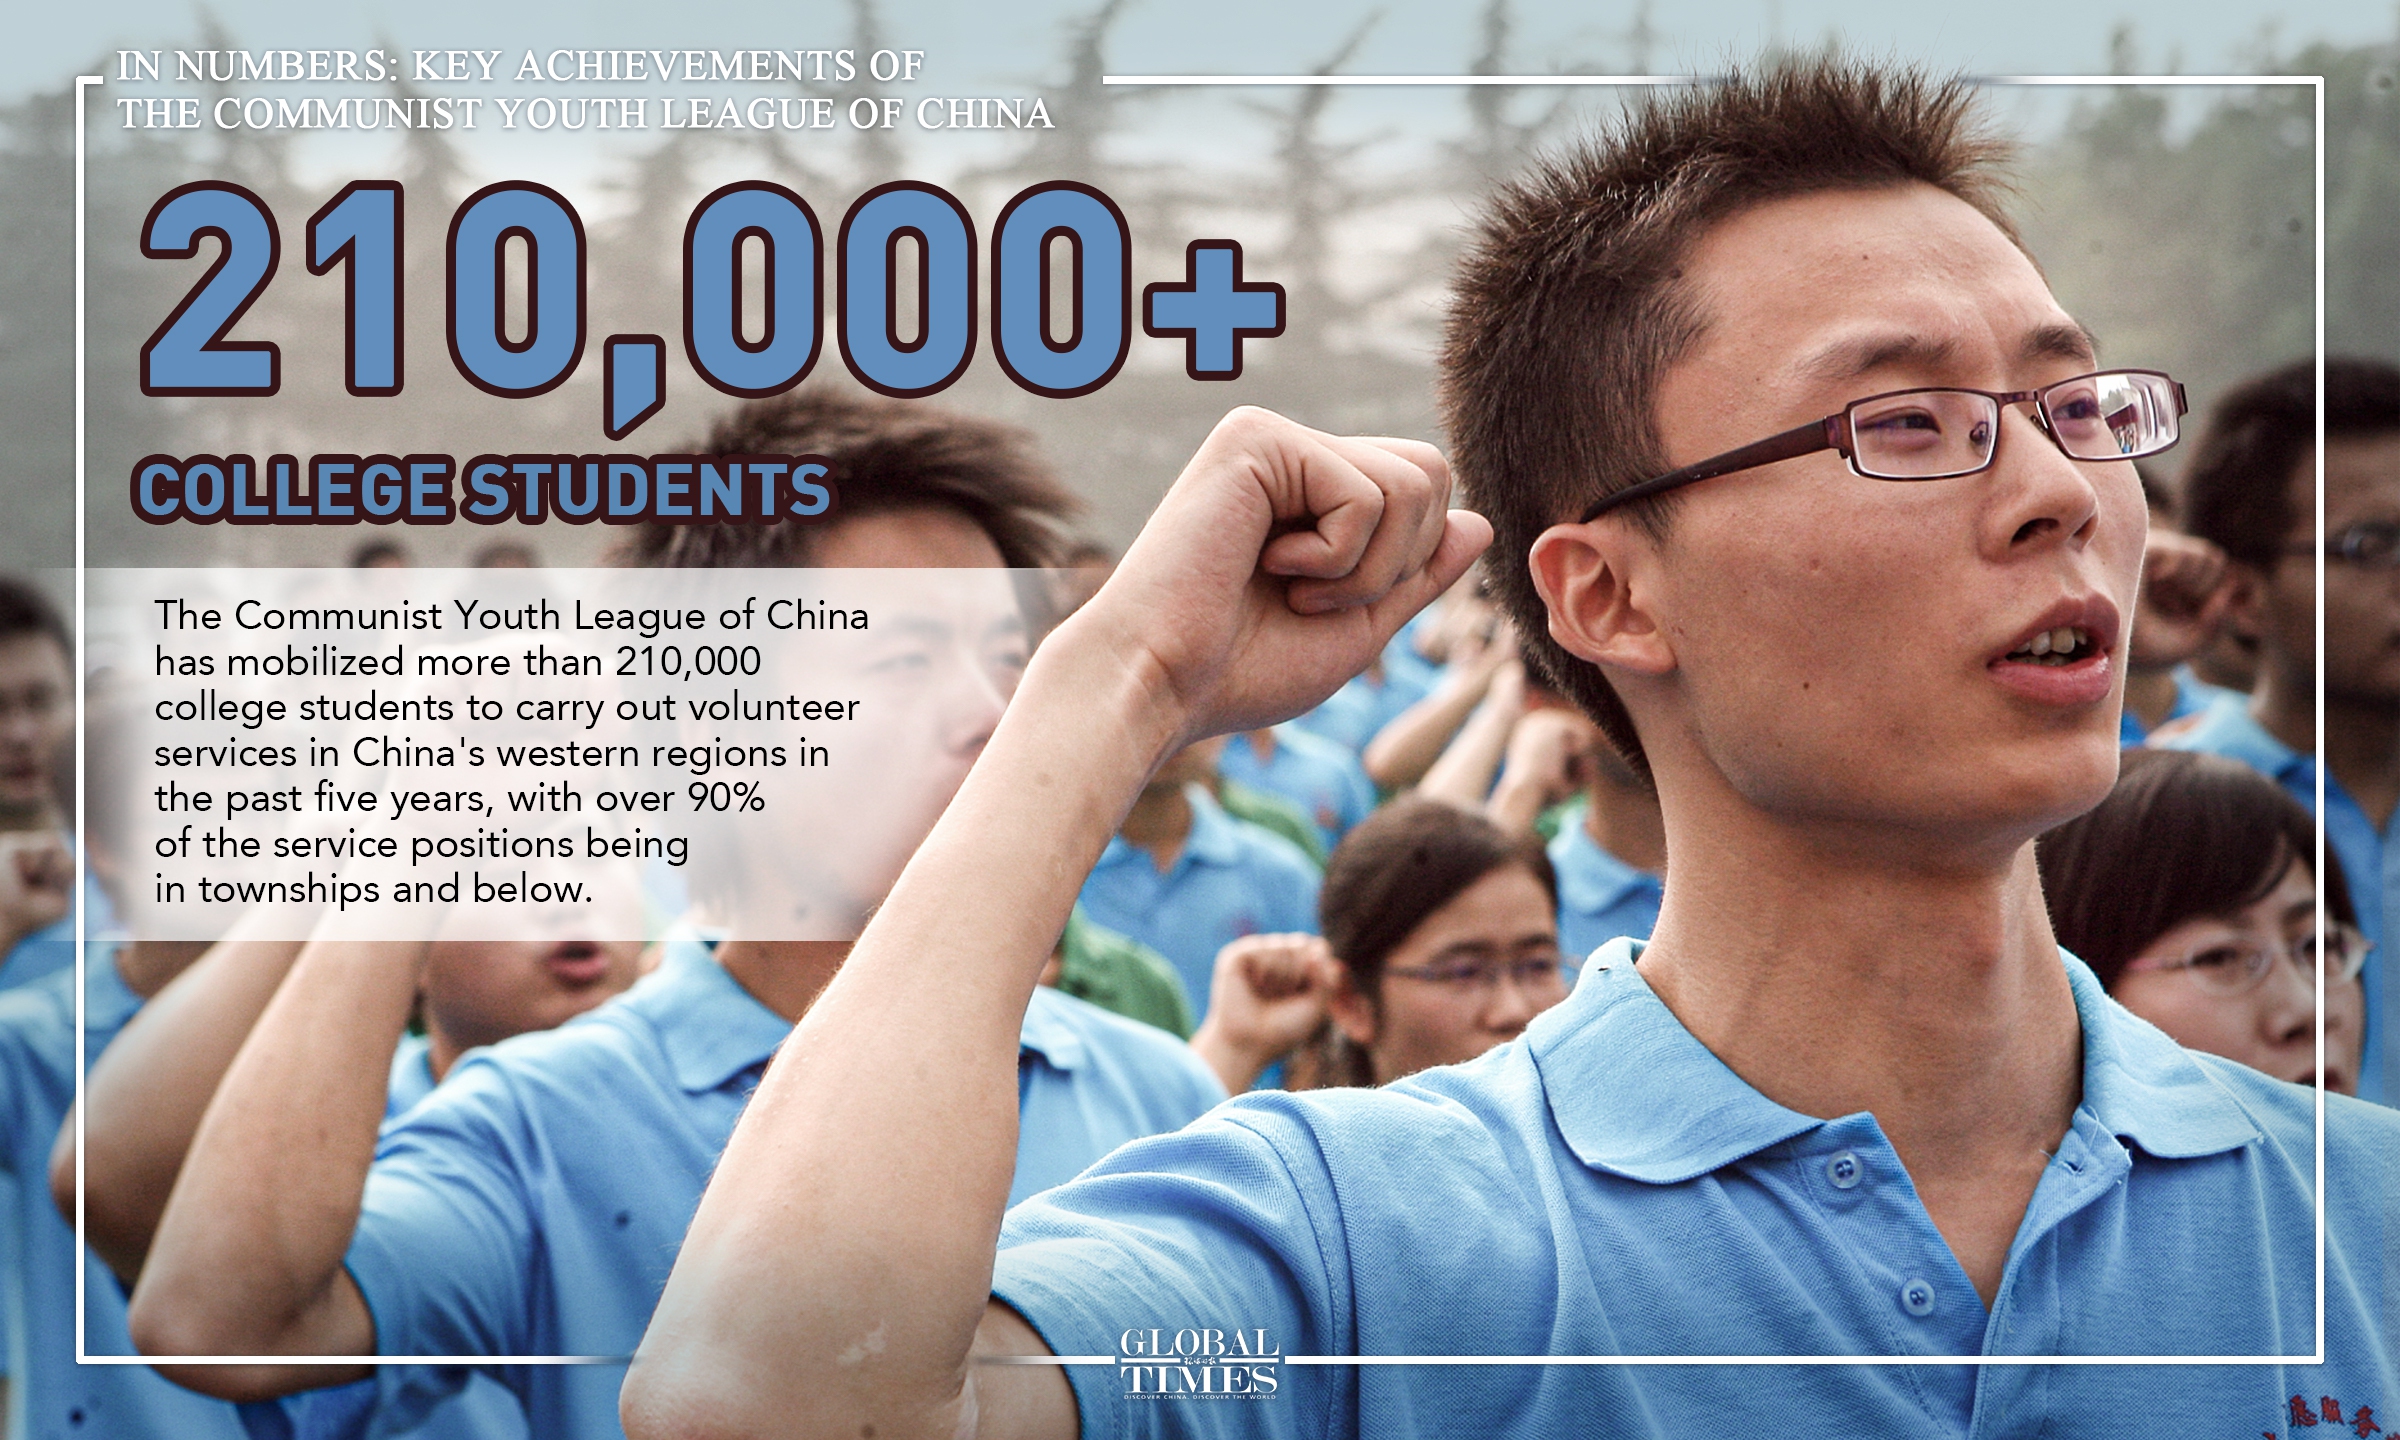 In numbers: key achievements of the Communist Youth League of China